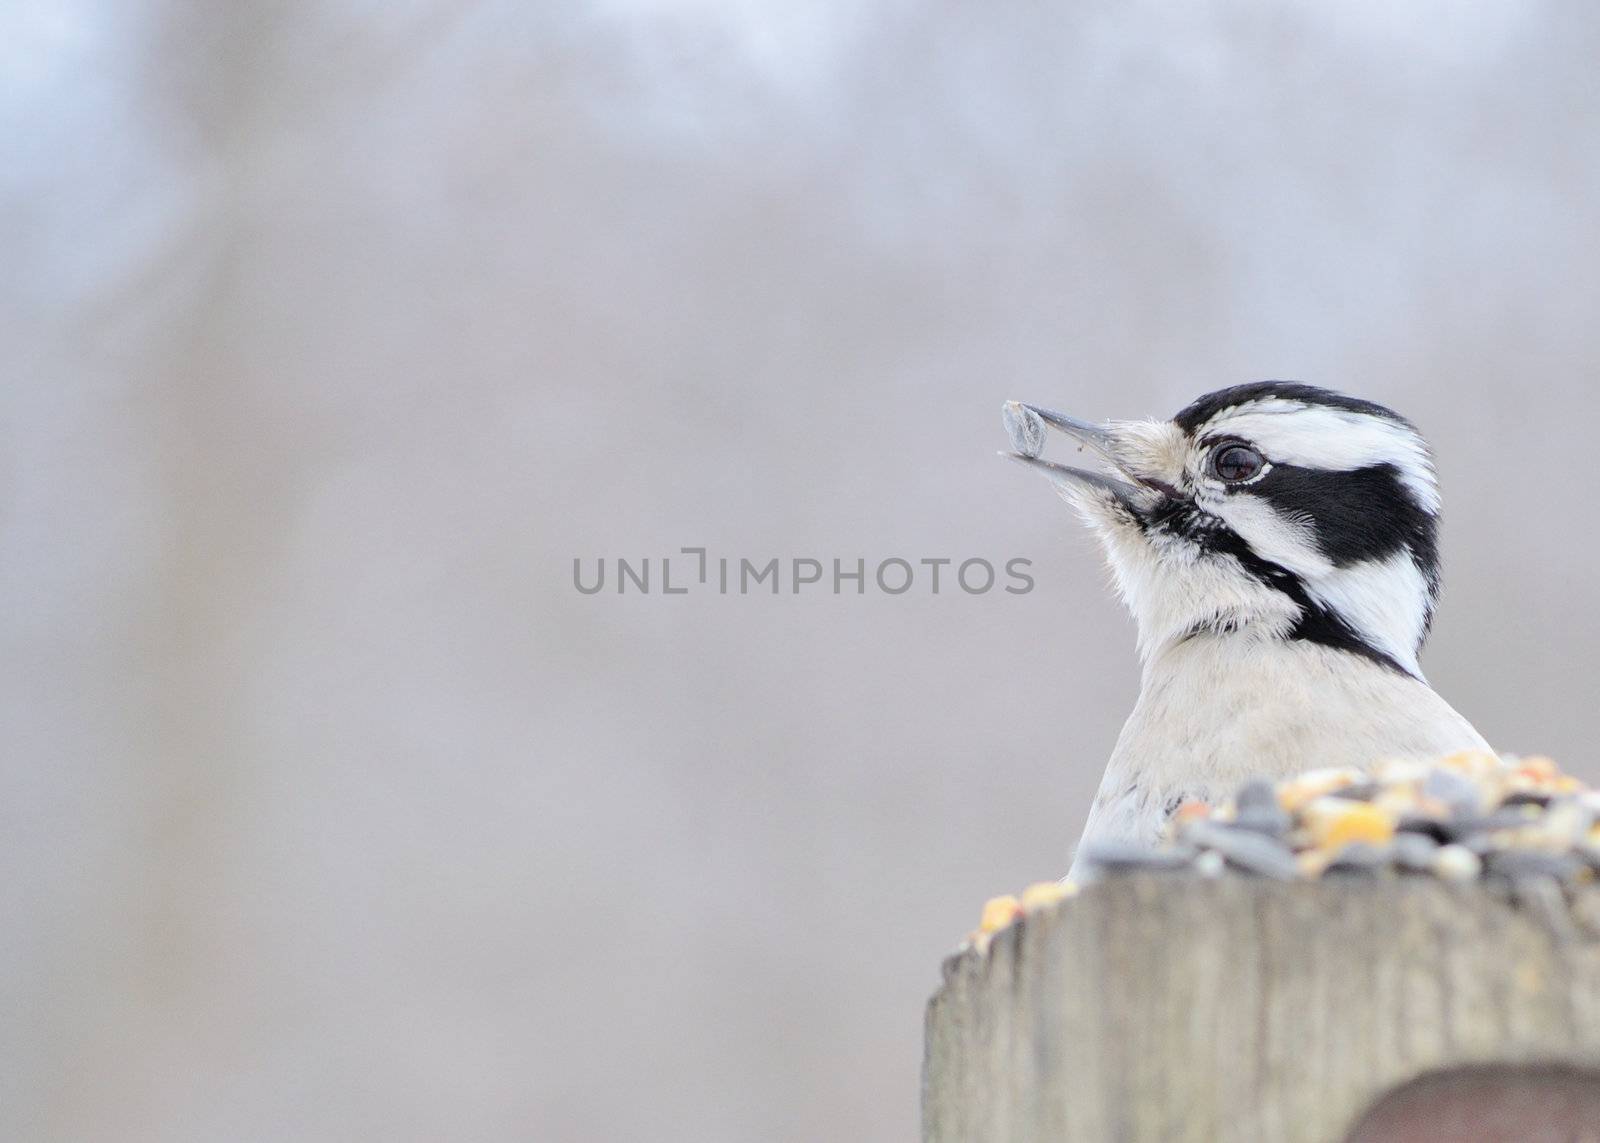 A female downy woodpecker perched on a post eating bird seed.